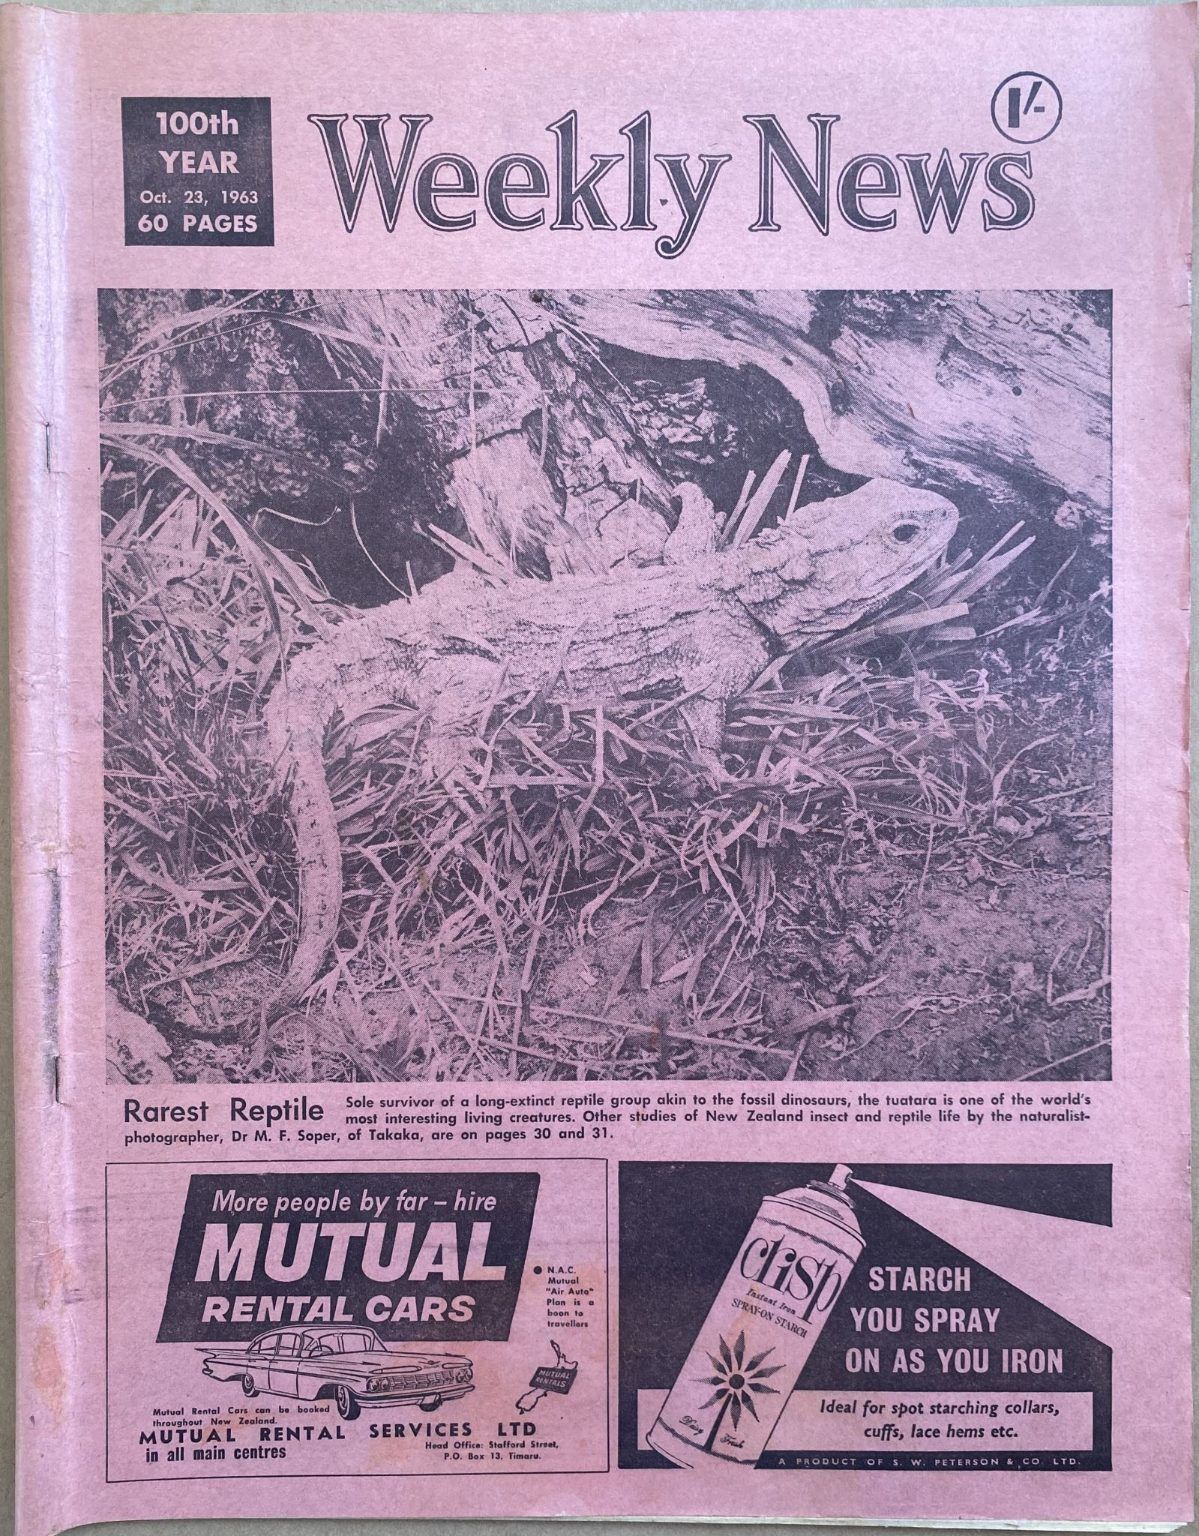 OLD NEWSPAPER: The Weekly News, No. 5213, 23 October 1963